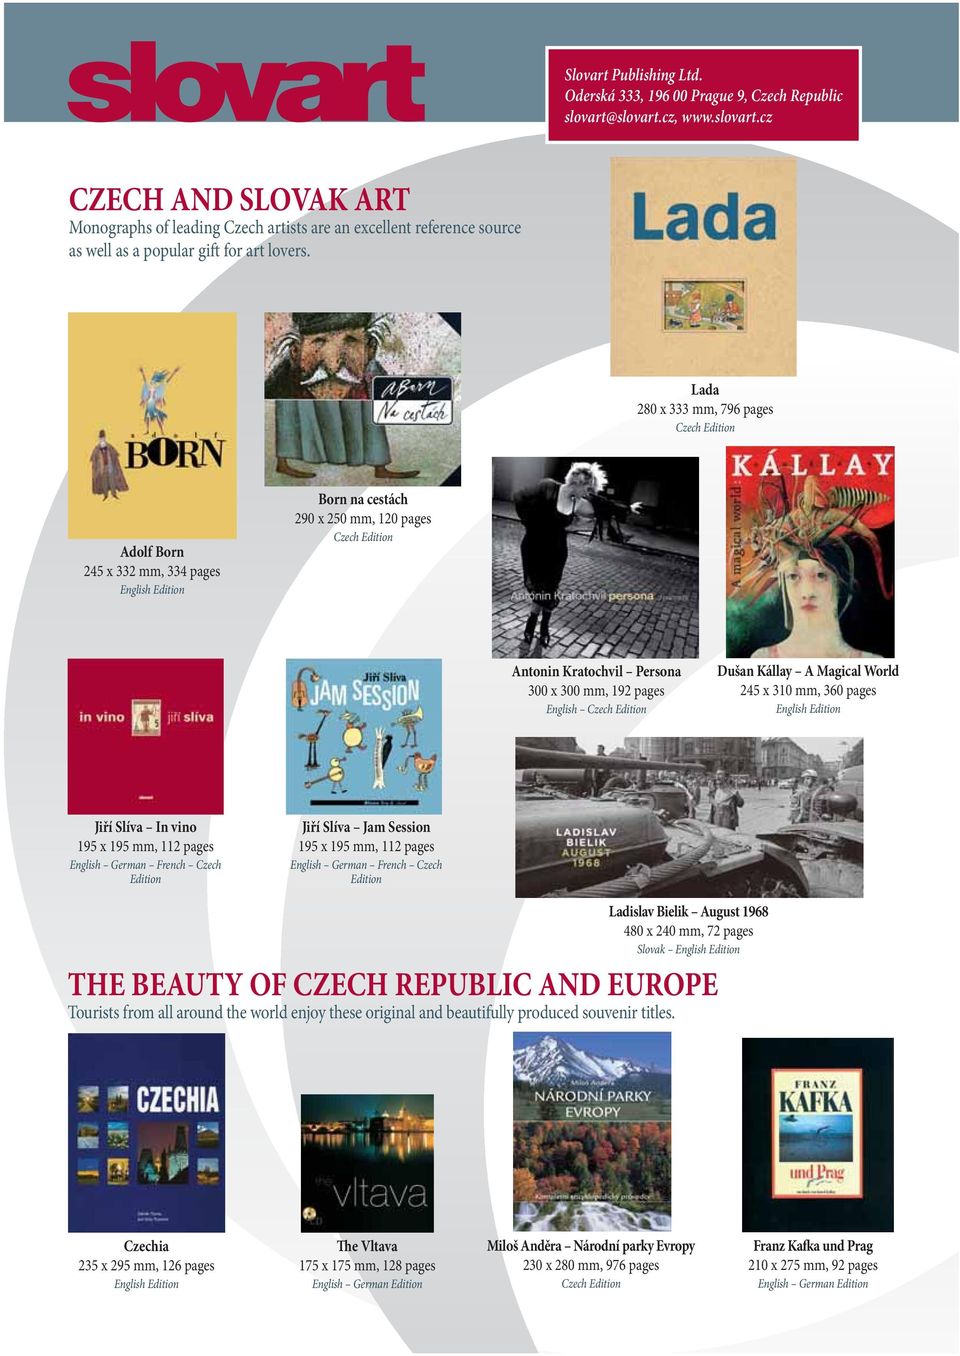 Lada 280 x 333 mm, 796 pages Czech Edition Adolf Born 245 x 332 mm, 334 pages English Edition Born na cestách 290 x 250 mm, 120 pages Czech Edition Antonin Kratochvil Persona 300 x 300 mm, 192 pages